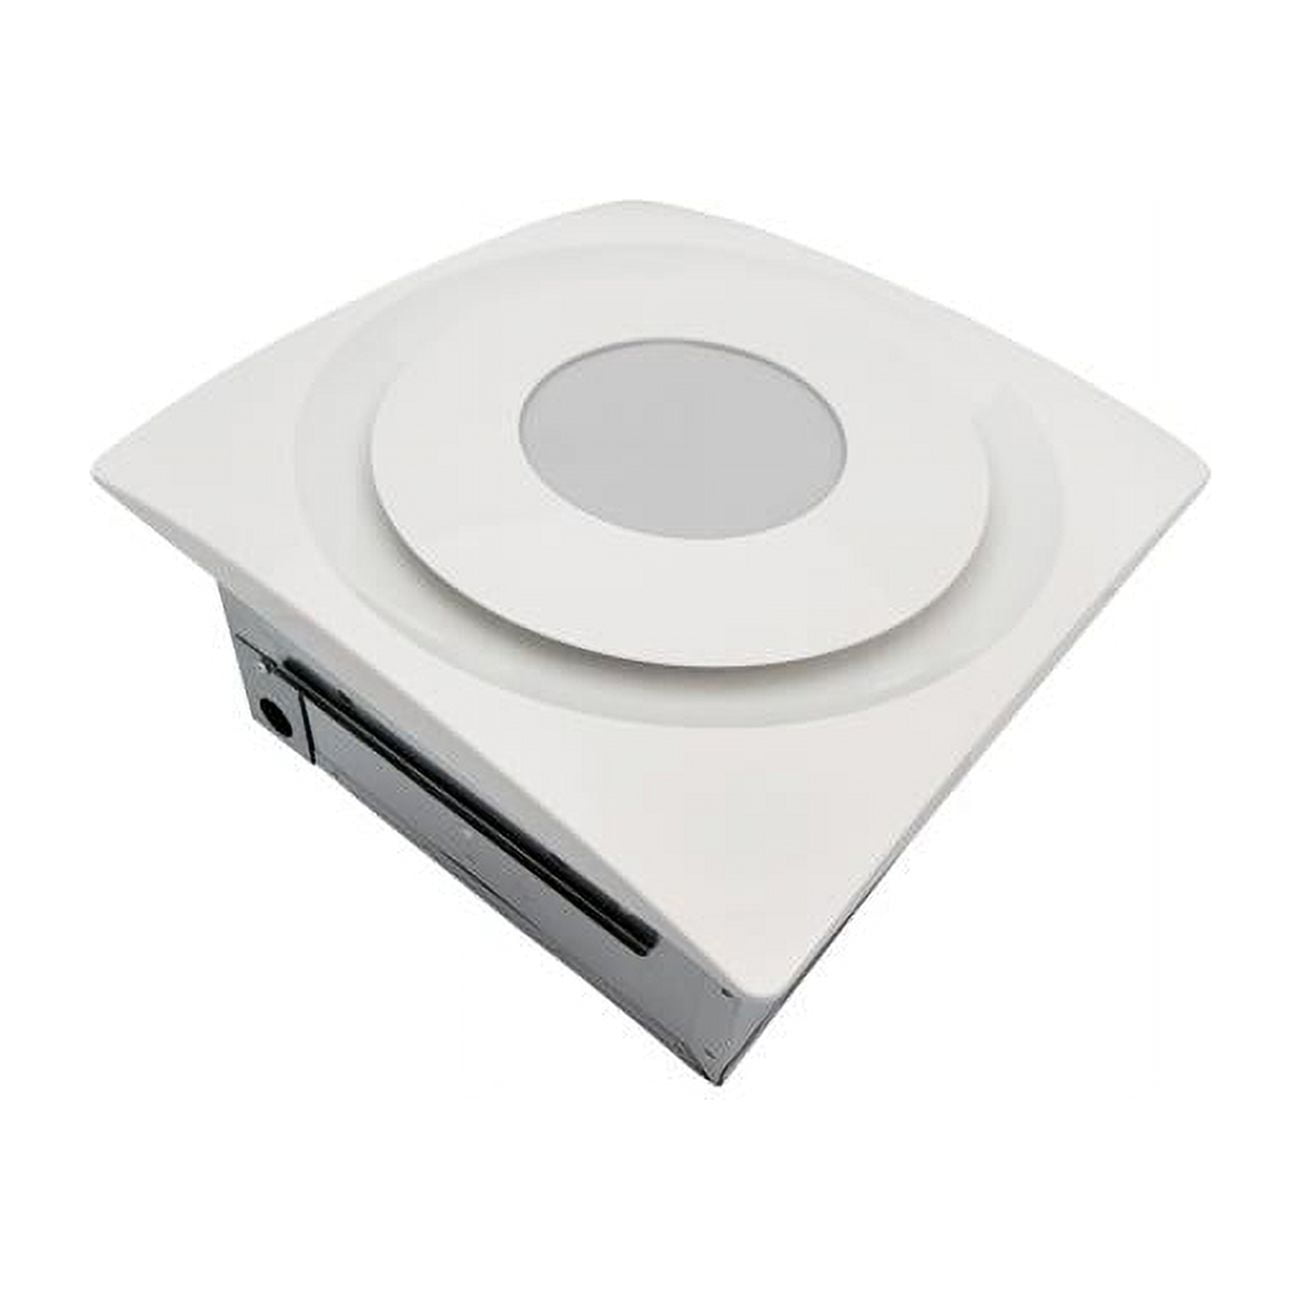 Picture of Aero Pure AP124-SL W 120 CFM Quiet Bathroom Fan with LED Light - White